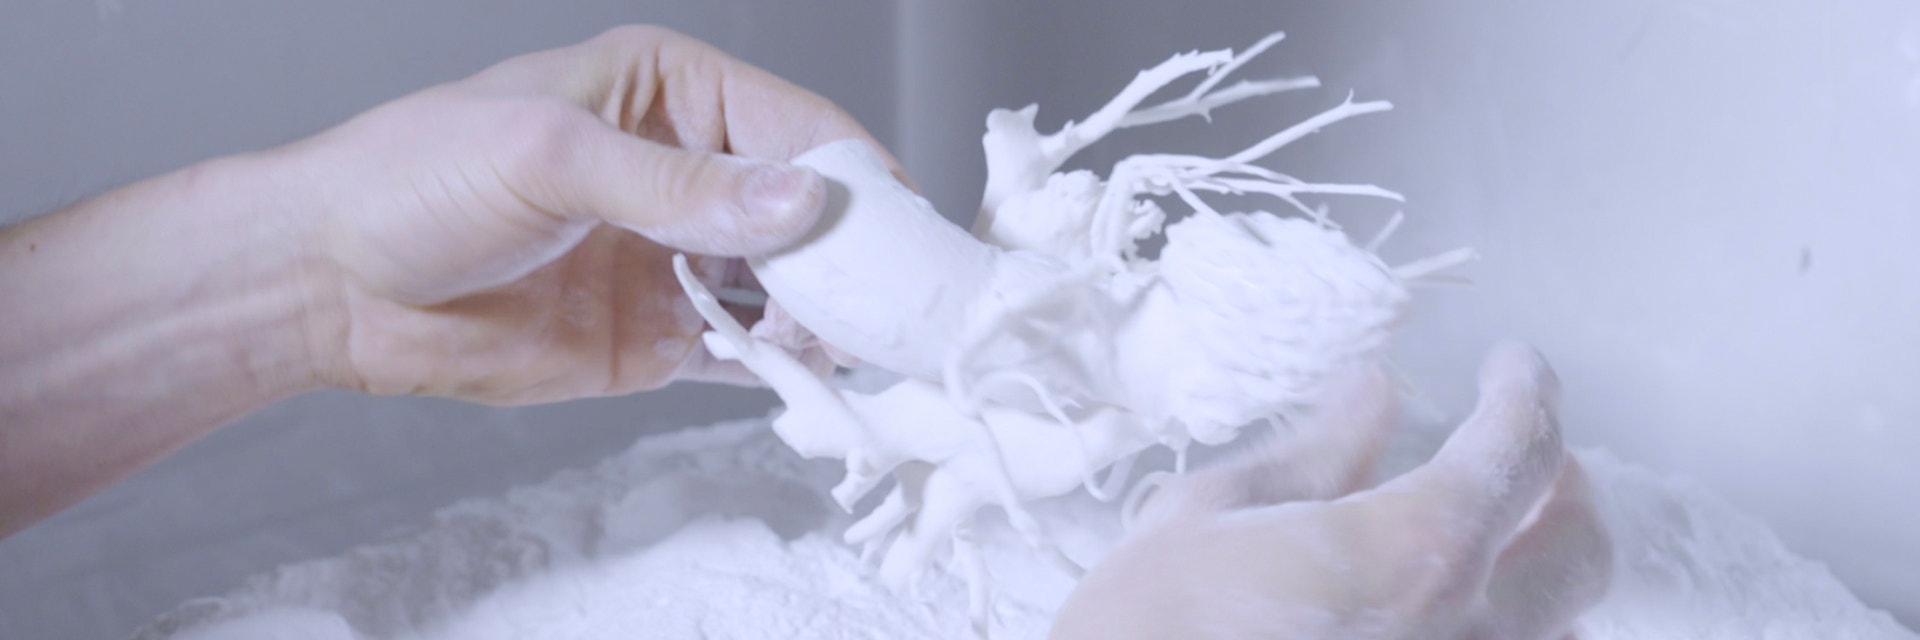 Person taking cardiac 3D-printed anatomical model out of 3D printing powder 